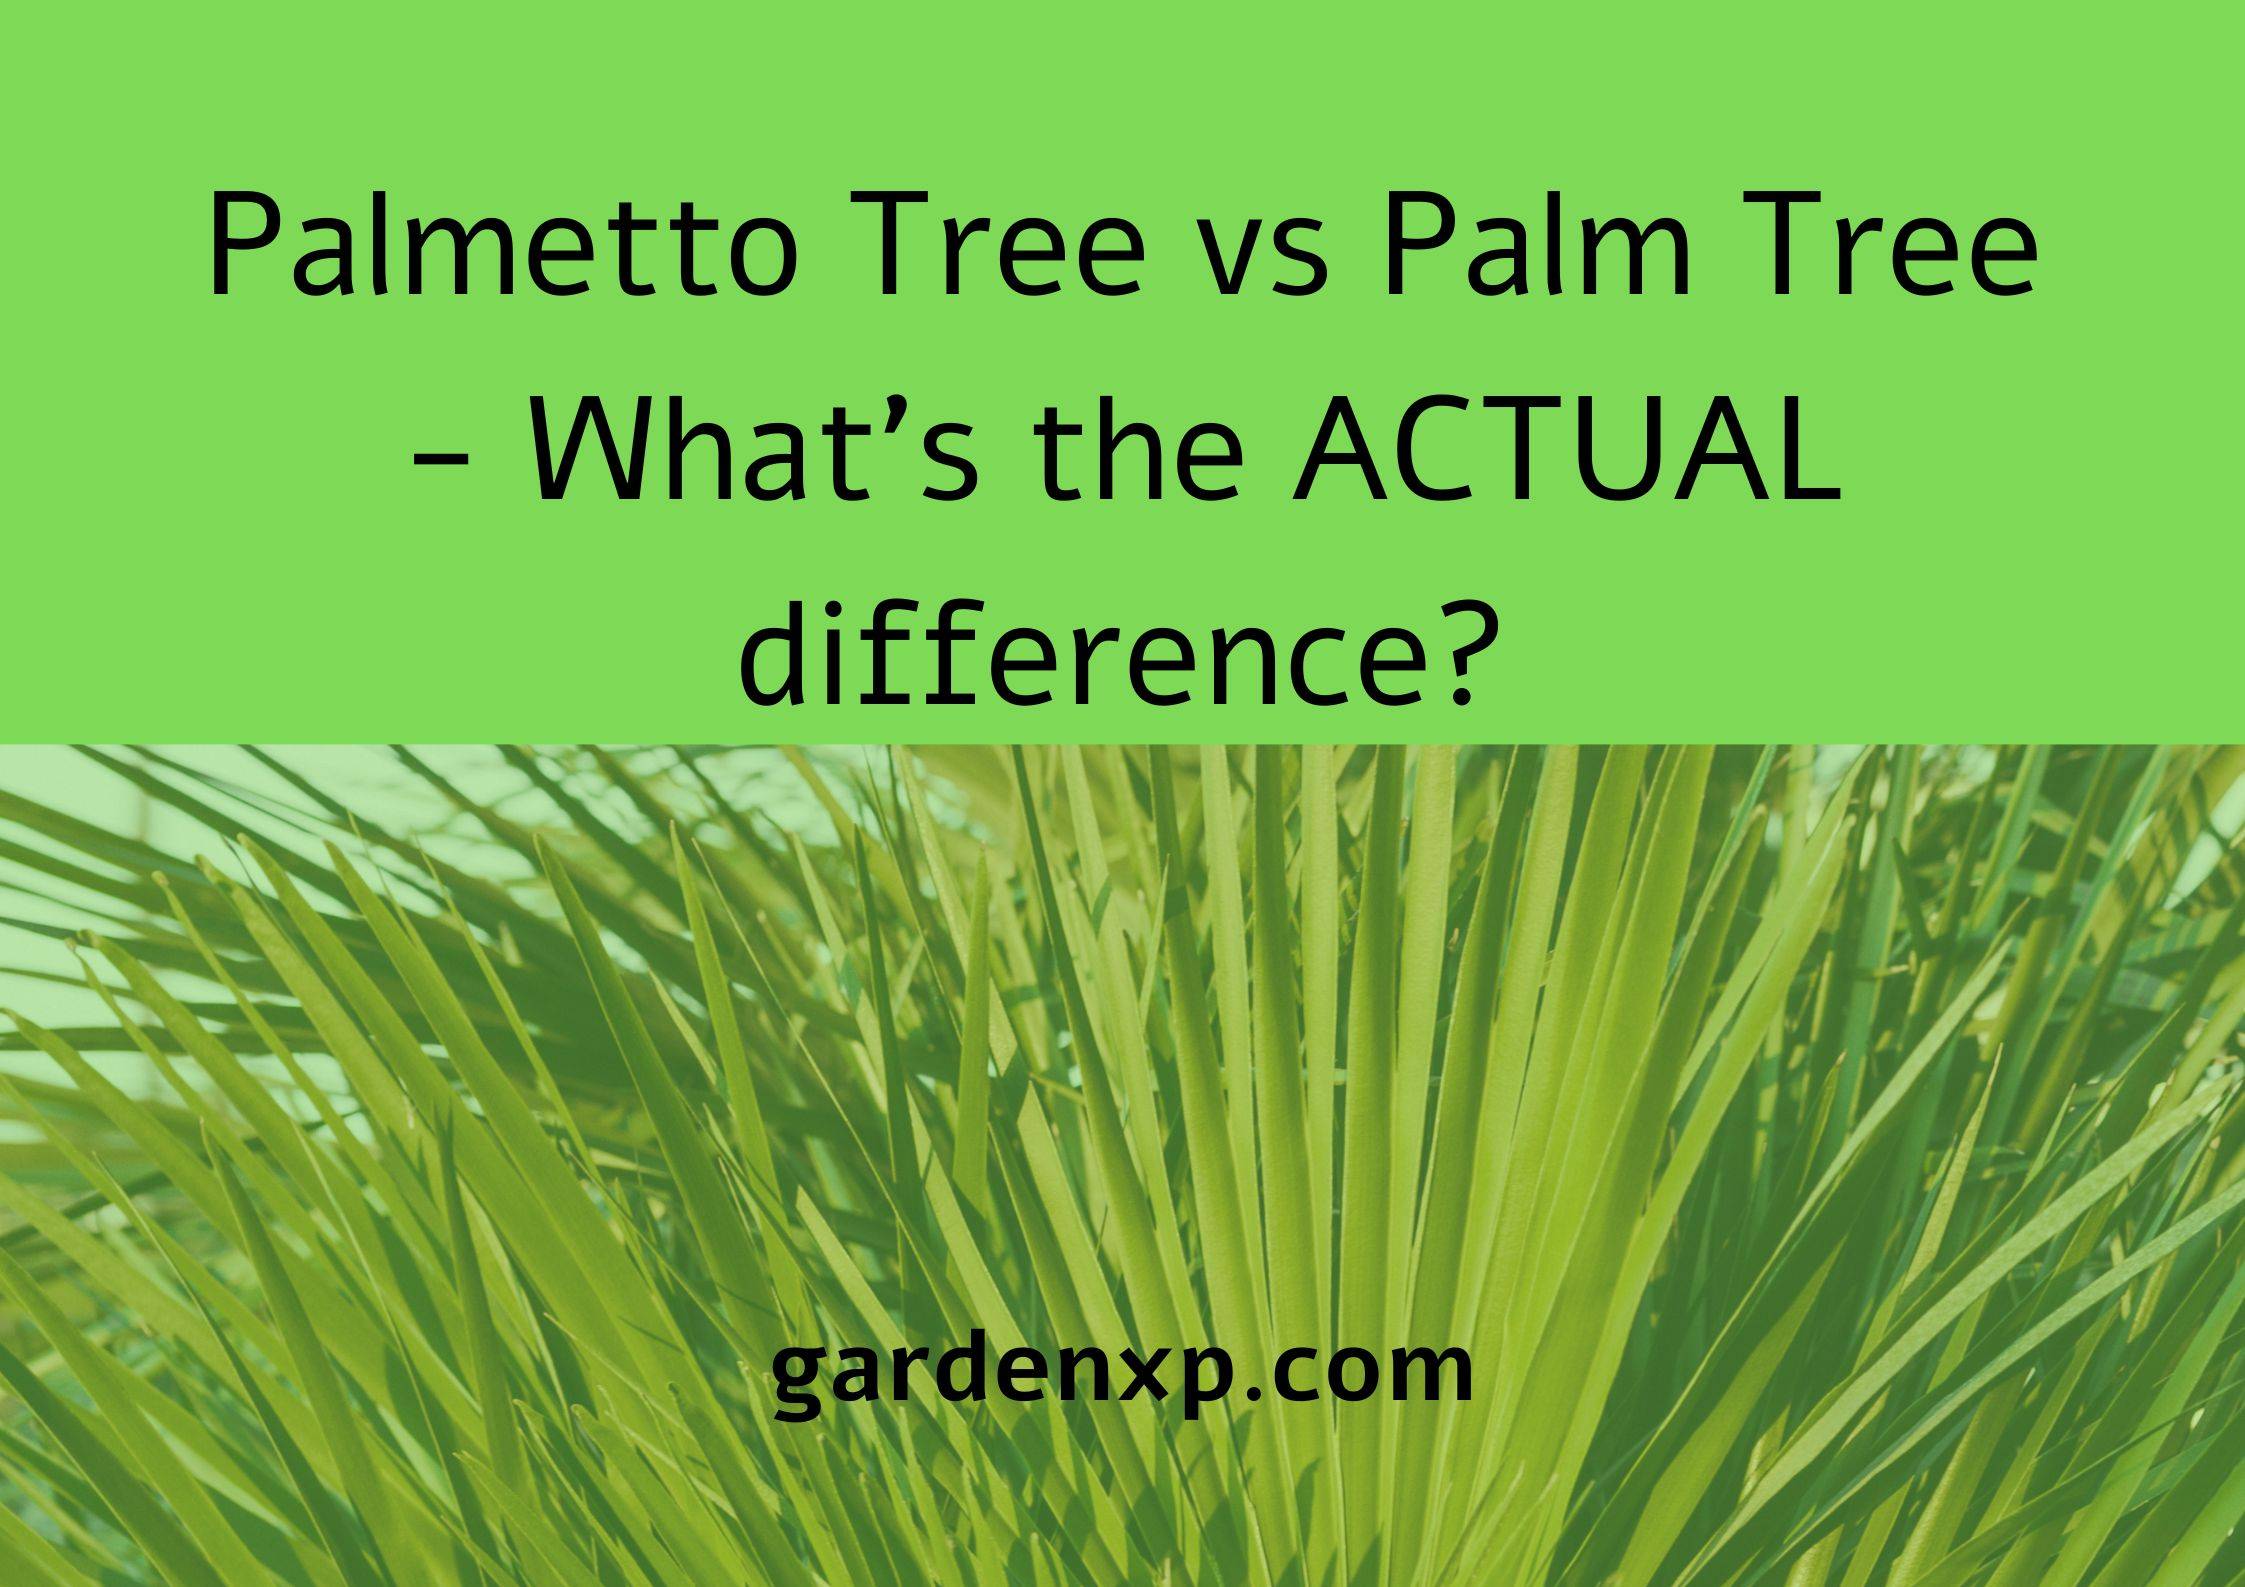 Palmetto Tree vs Palm Tree - What's the ACTUAL difference?